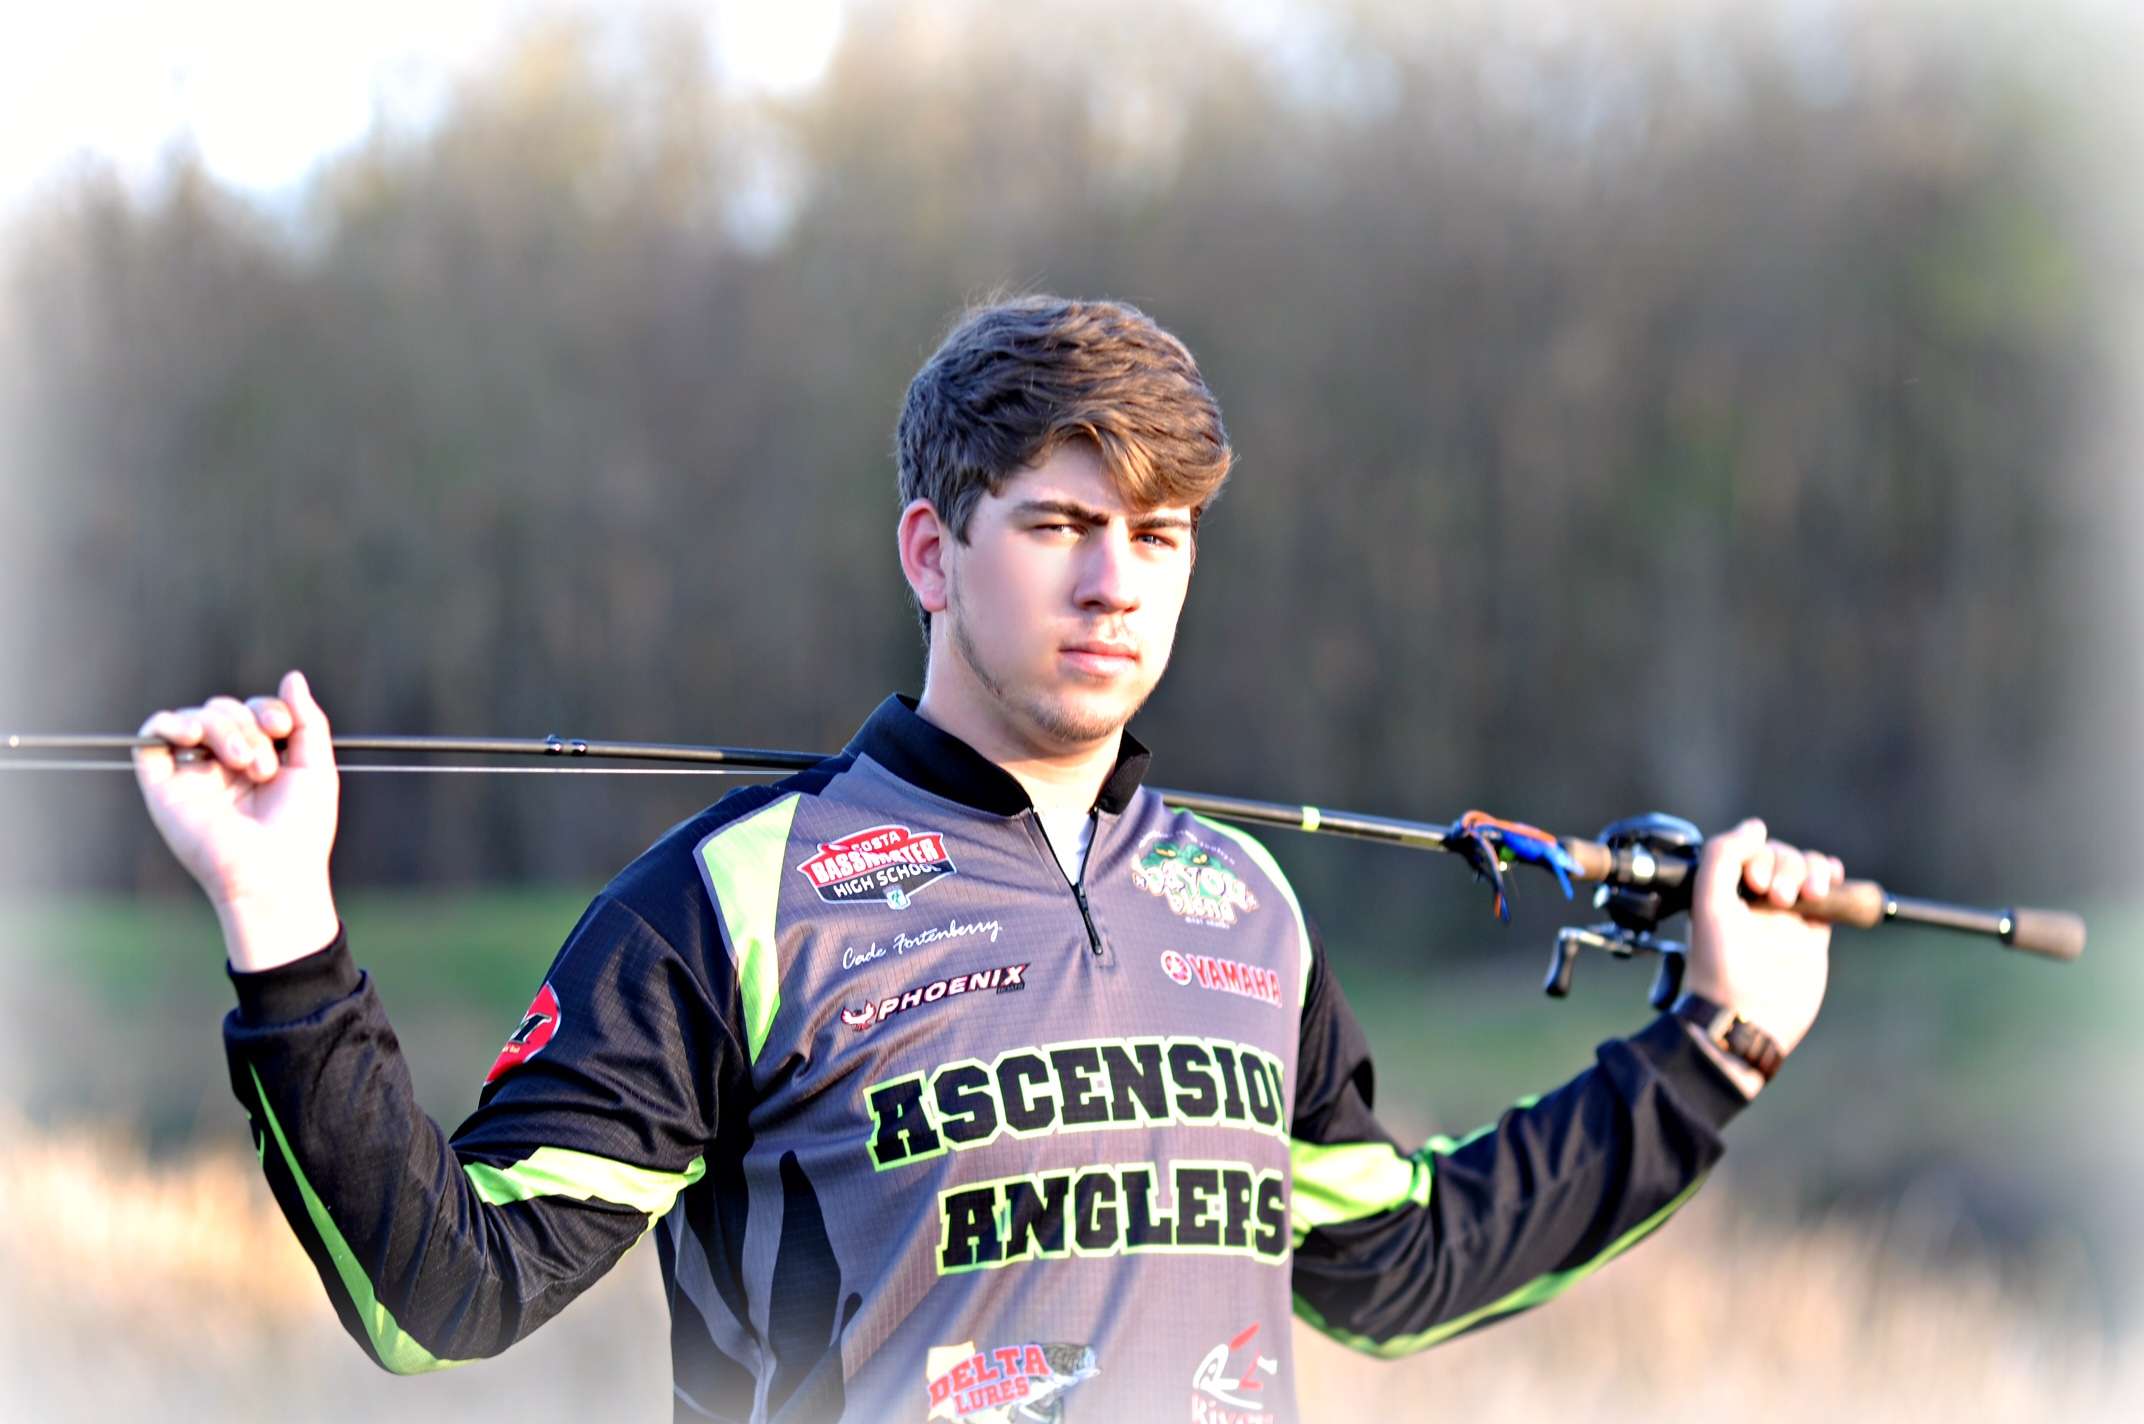 <b>Cade Fortenberry, Prairieville, La. </b><br>
Fortenberry is a senior at St. Amant High School and will be competing in his third Bassmaster High School National Championship in June. In 2016, Fortenberry earned two wins in high school state tournament qualifiers â one where he bested 131 teams on the Red River. 
<p>

As a member of the Ascension Anglers bass team, Fortenberry has taken part in multiple cleanup days, volunteered with the Angling Against Autism team bass tournament and helped to provide relief aid for victims of the 2016 Louisiana floods.  
<p>

During local childcare facility field trips, Fortenberry served as the fishing guide. âHe baited their poles, took their catches off the hooks and enjoyed sharing his knowledge of the sport,â according to his father, Gilbert.
